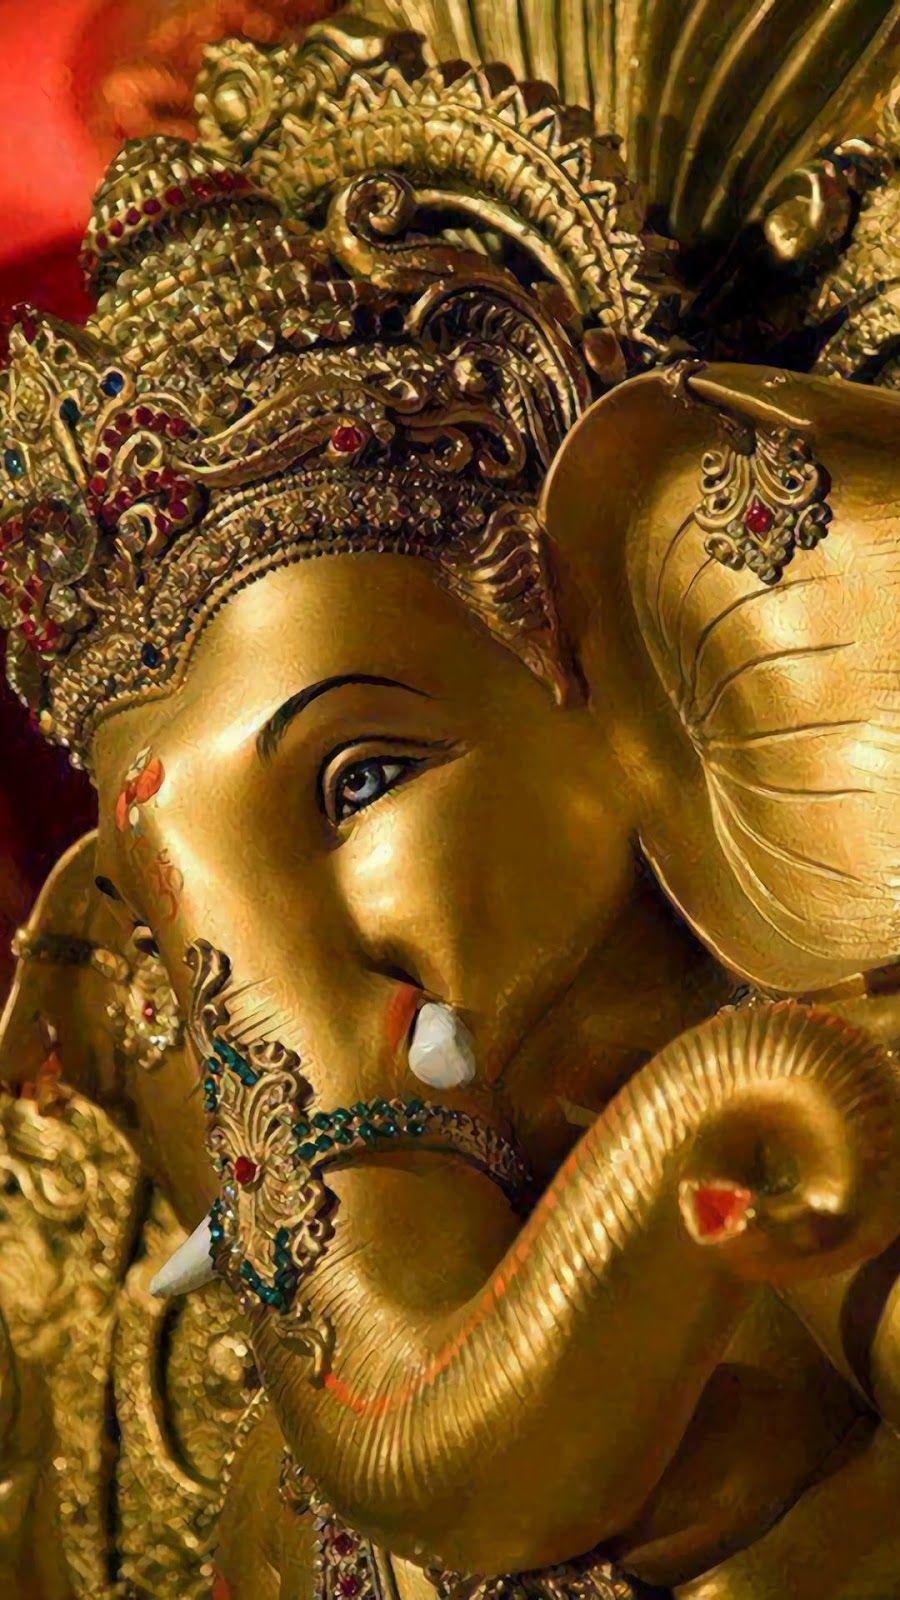 Ganesh Mobile Hd Wallpapers Wallpaper Cave Most awesome sri ganpati images, hd photos, beautiful wallpapers. ganesh mobile hd wallpapers wallpaper